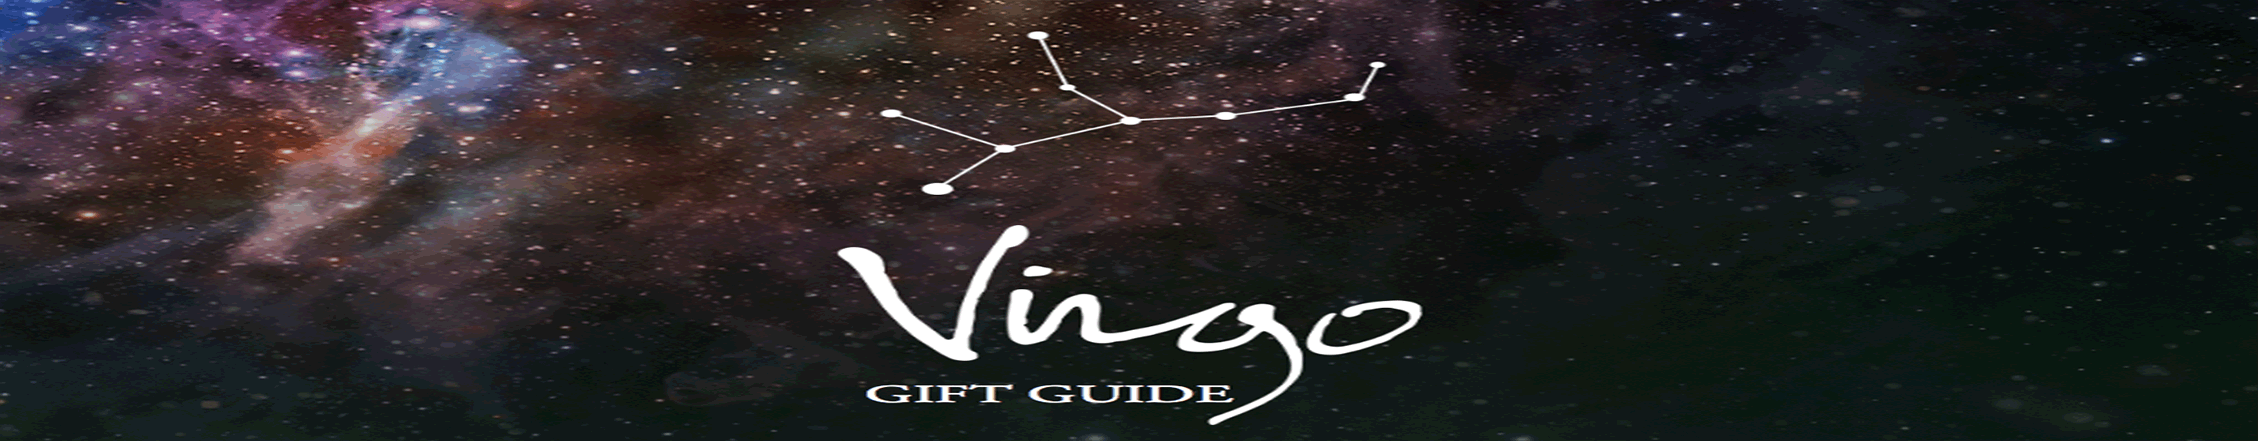 the astrology zone